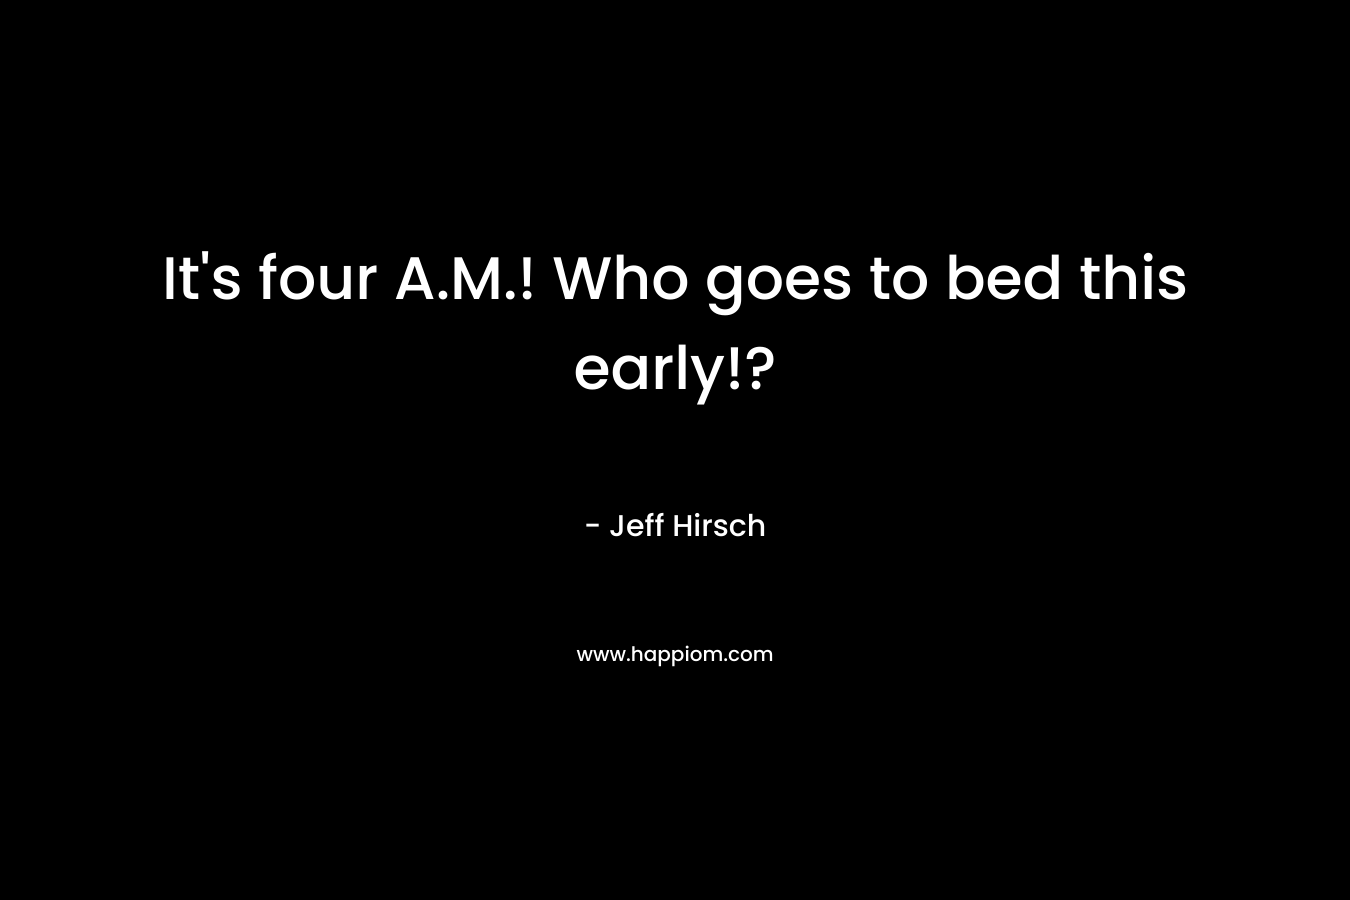 It's four A.M.! Who goes to bed this early!?